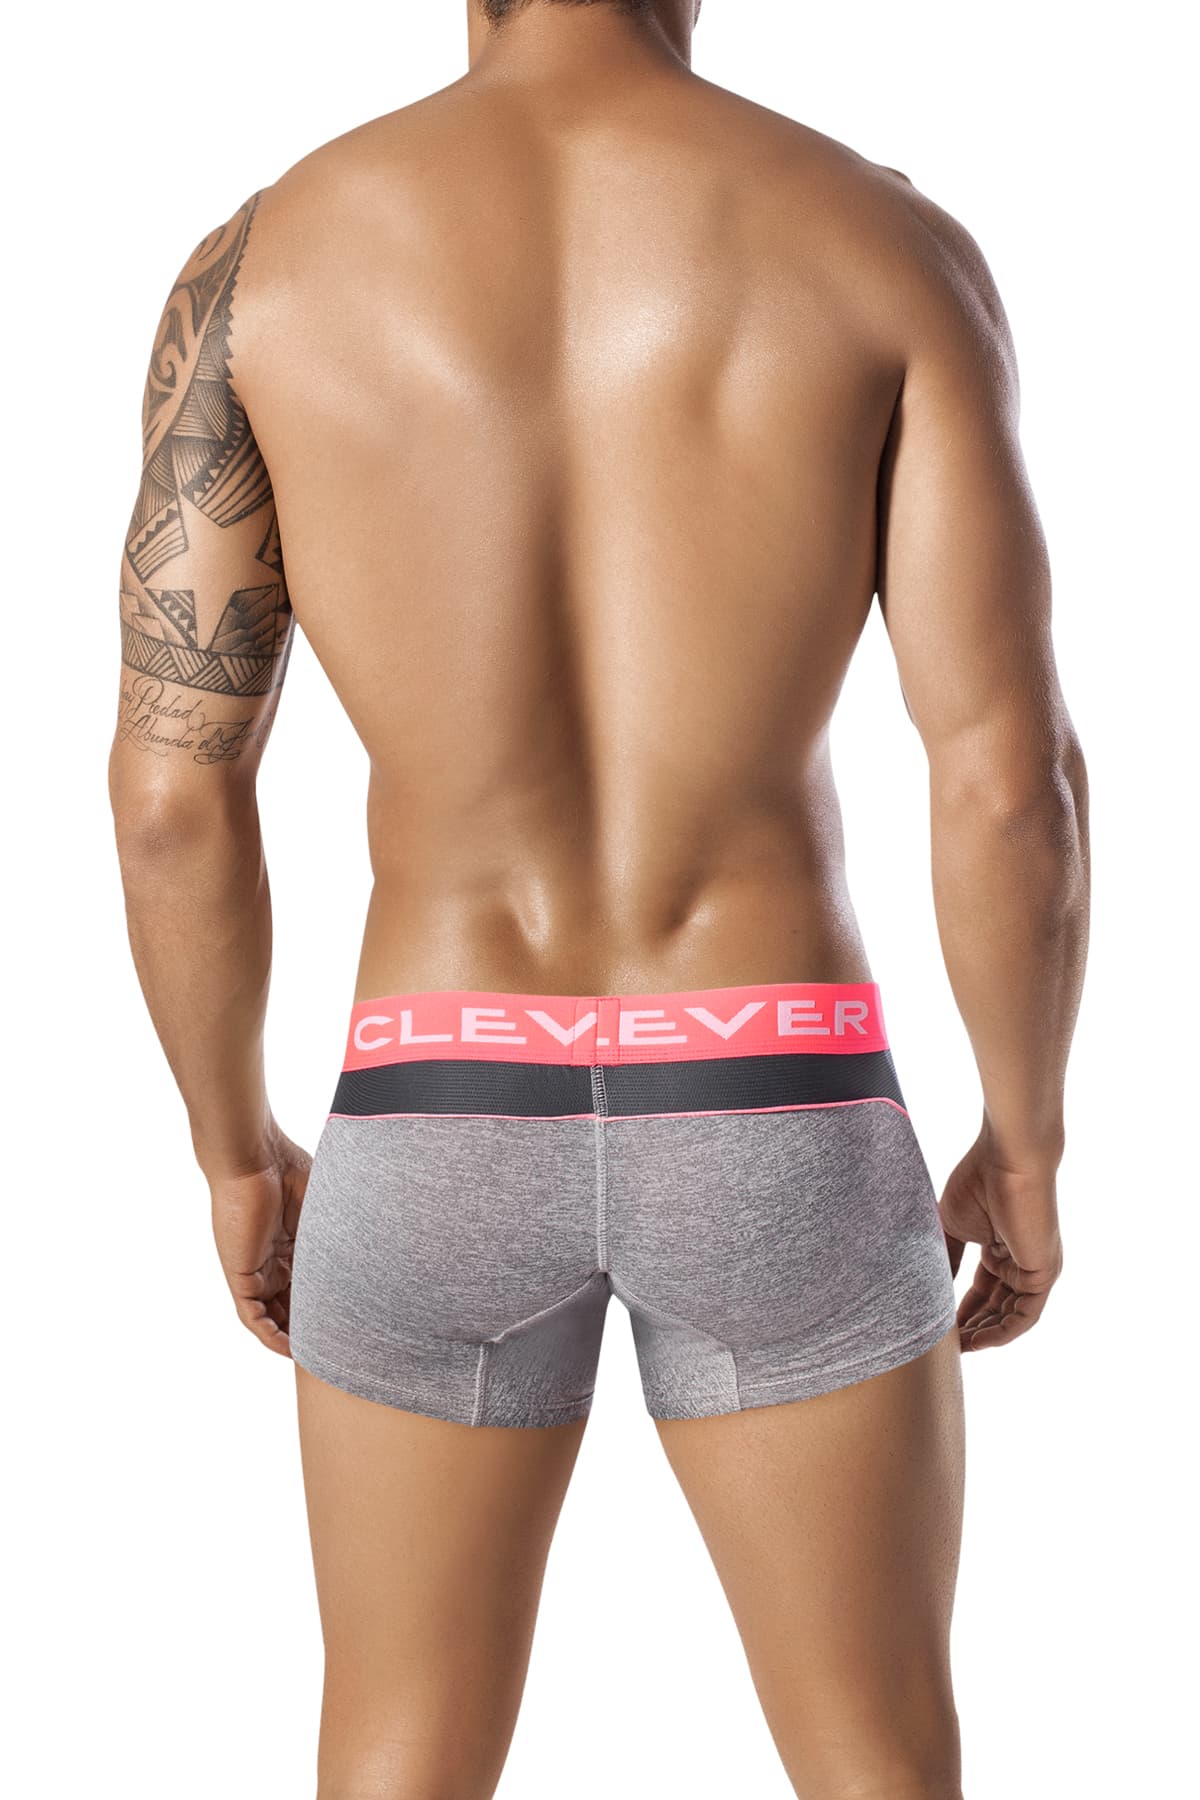 Clever Grey Neon Tree Boxer